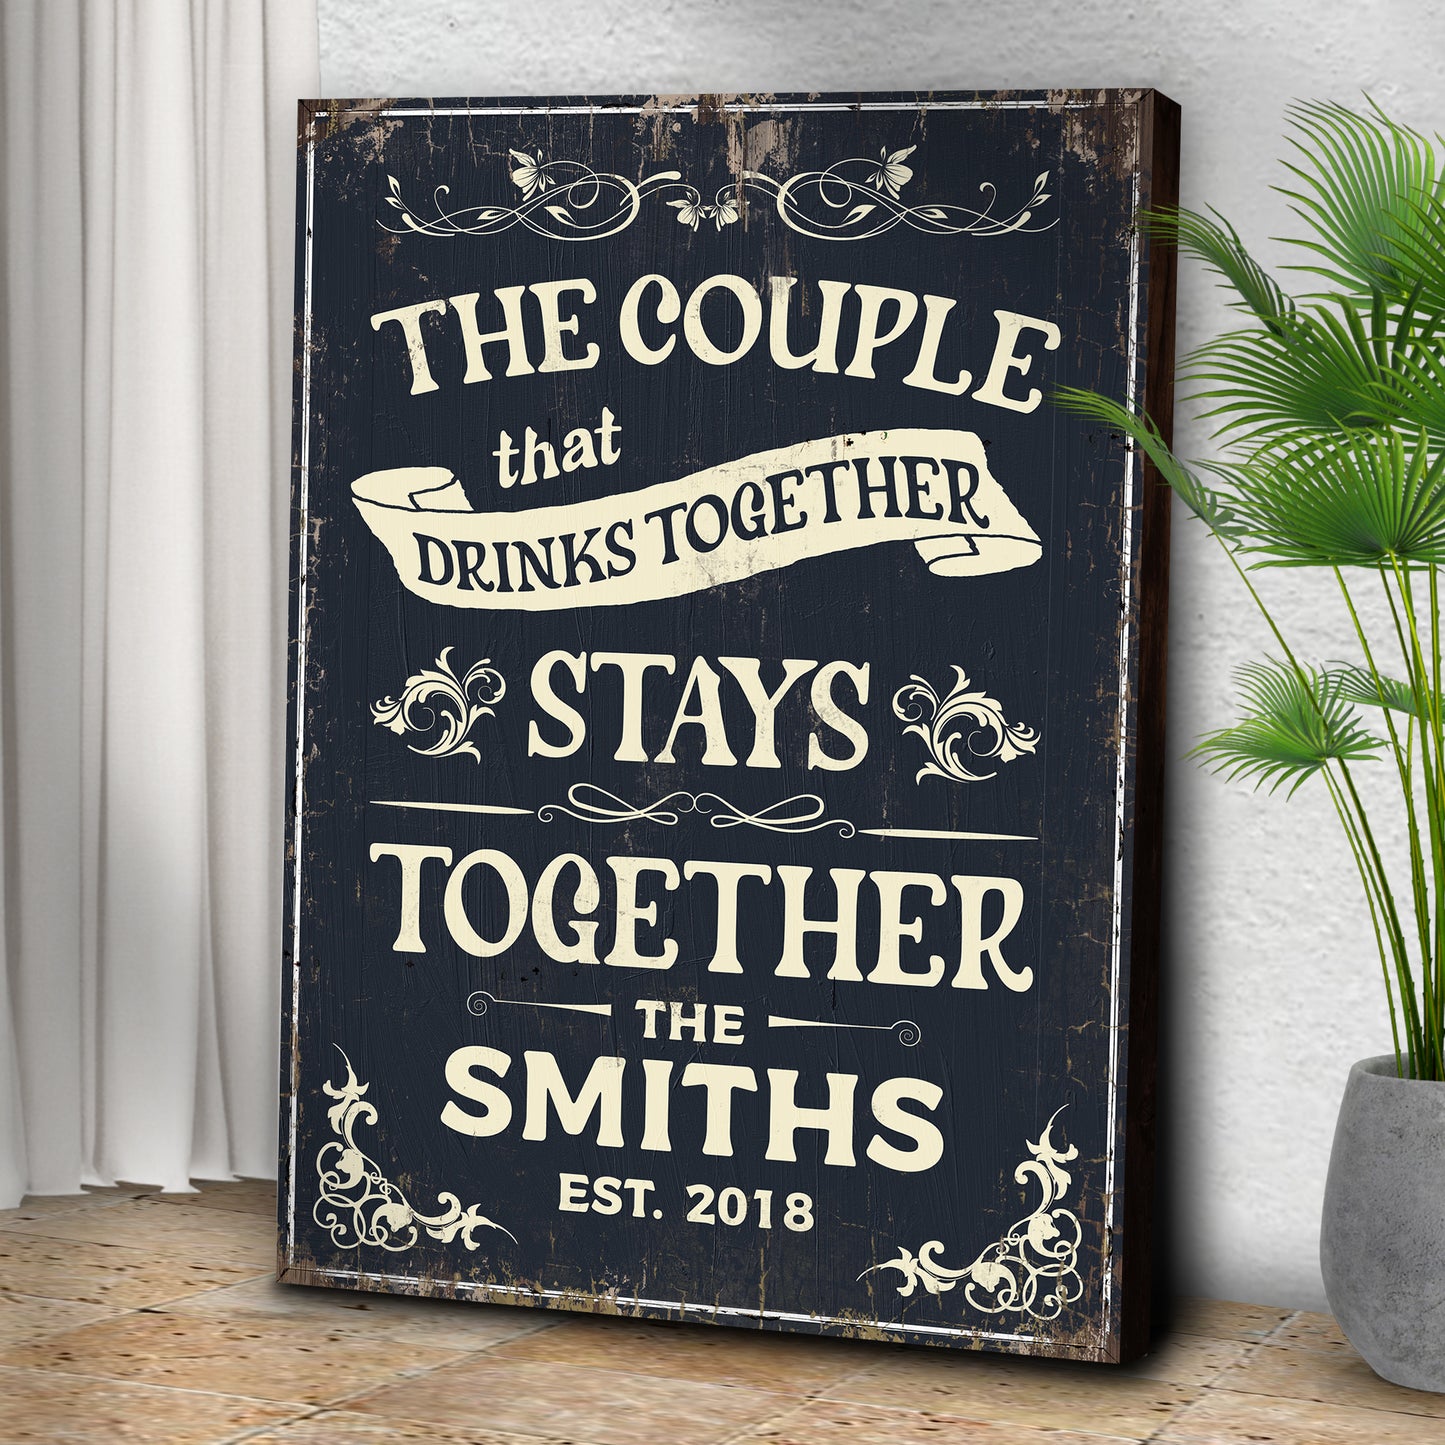 The Couple that drinks together stays together Custom Sign (READY TO HANG) - Wall Art Image by Tailored Canvases